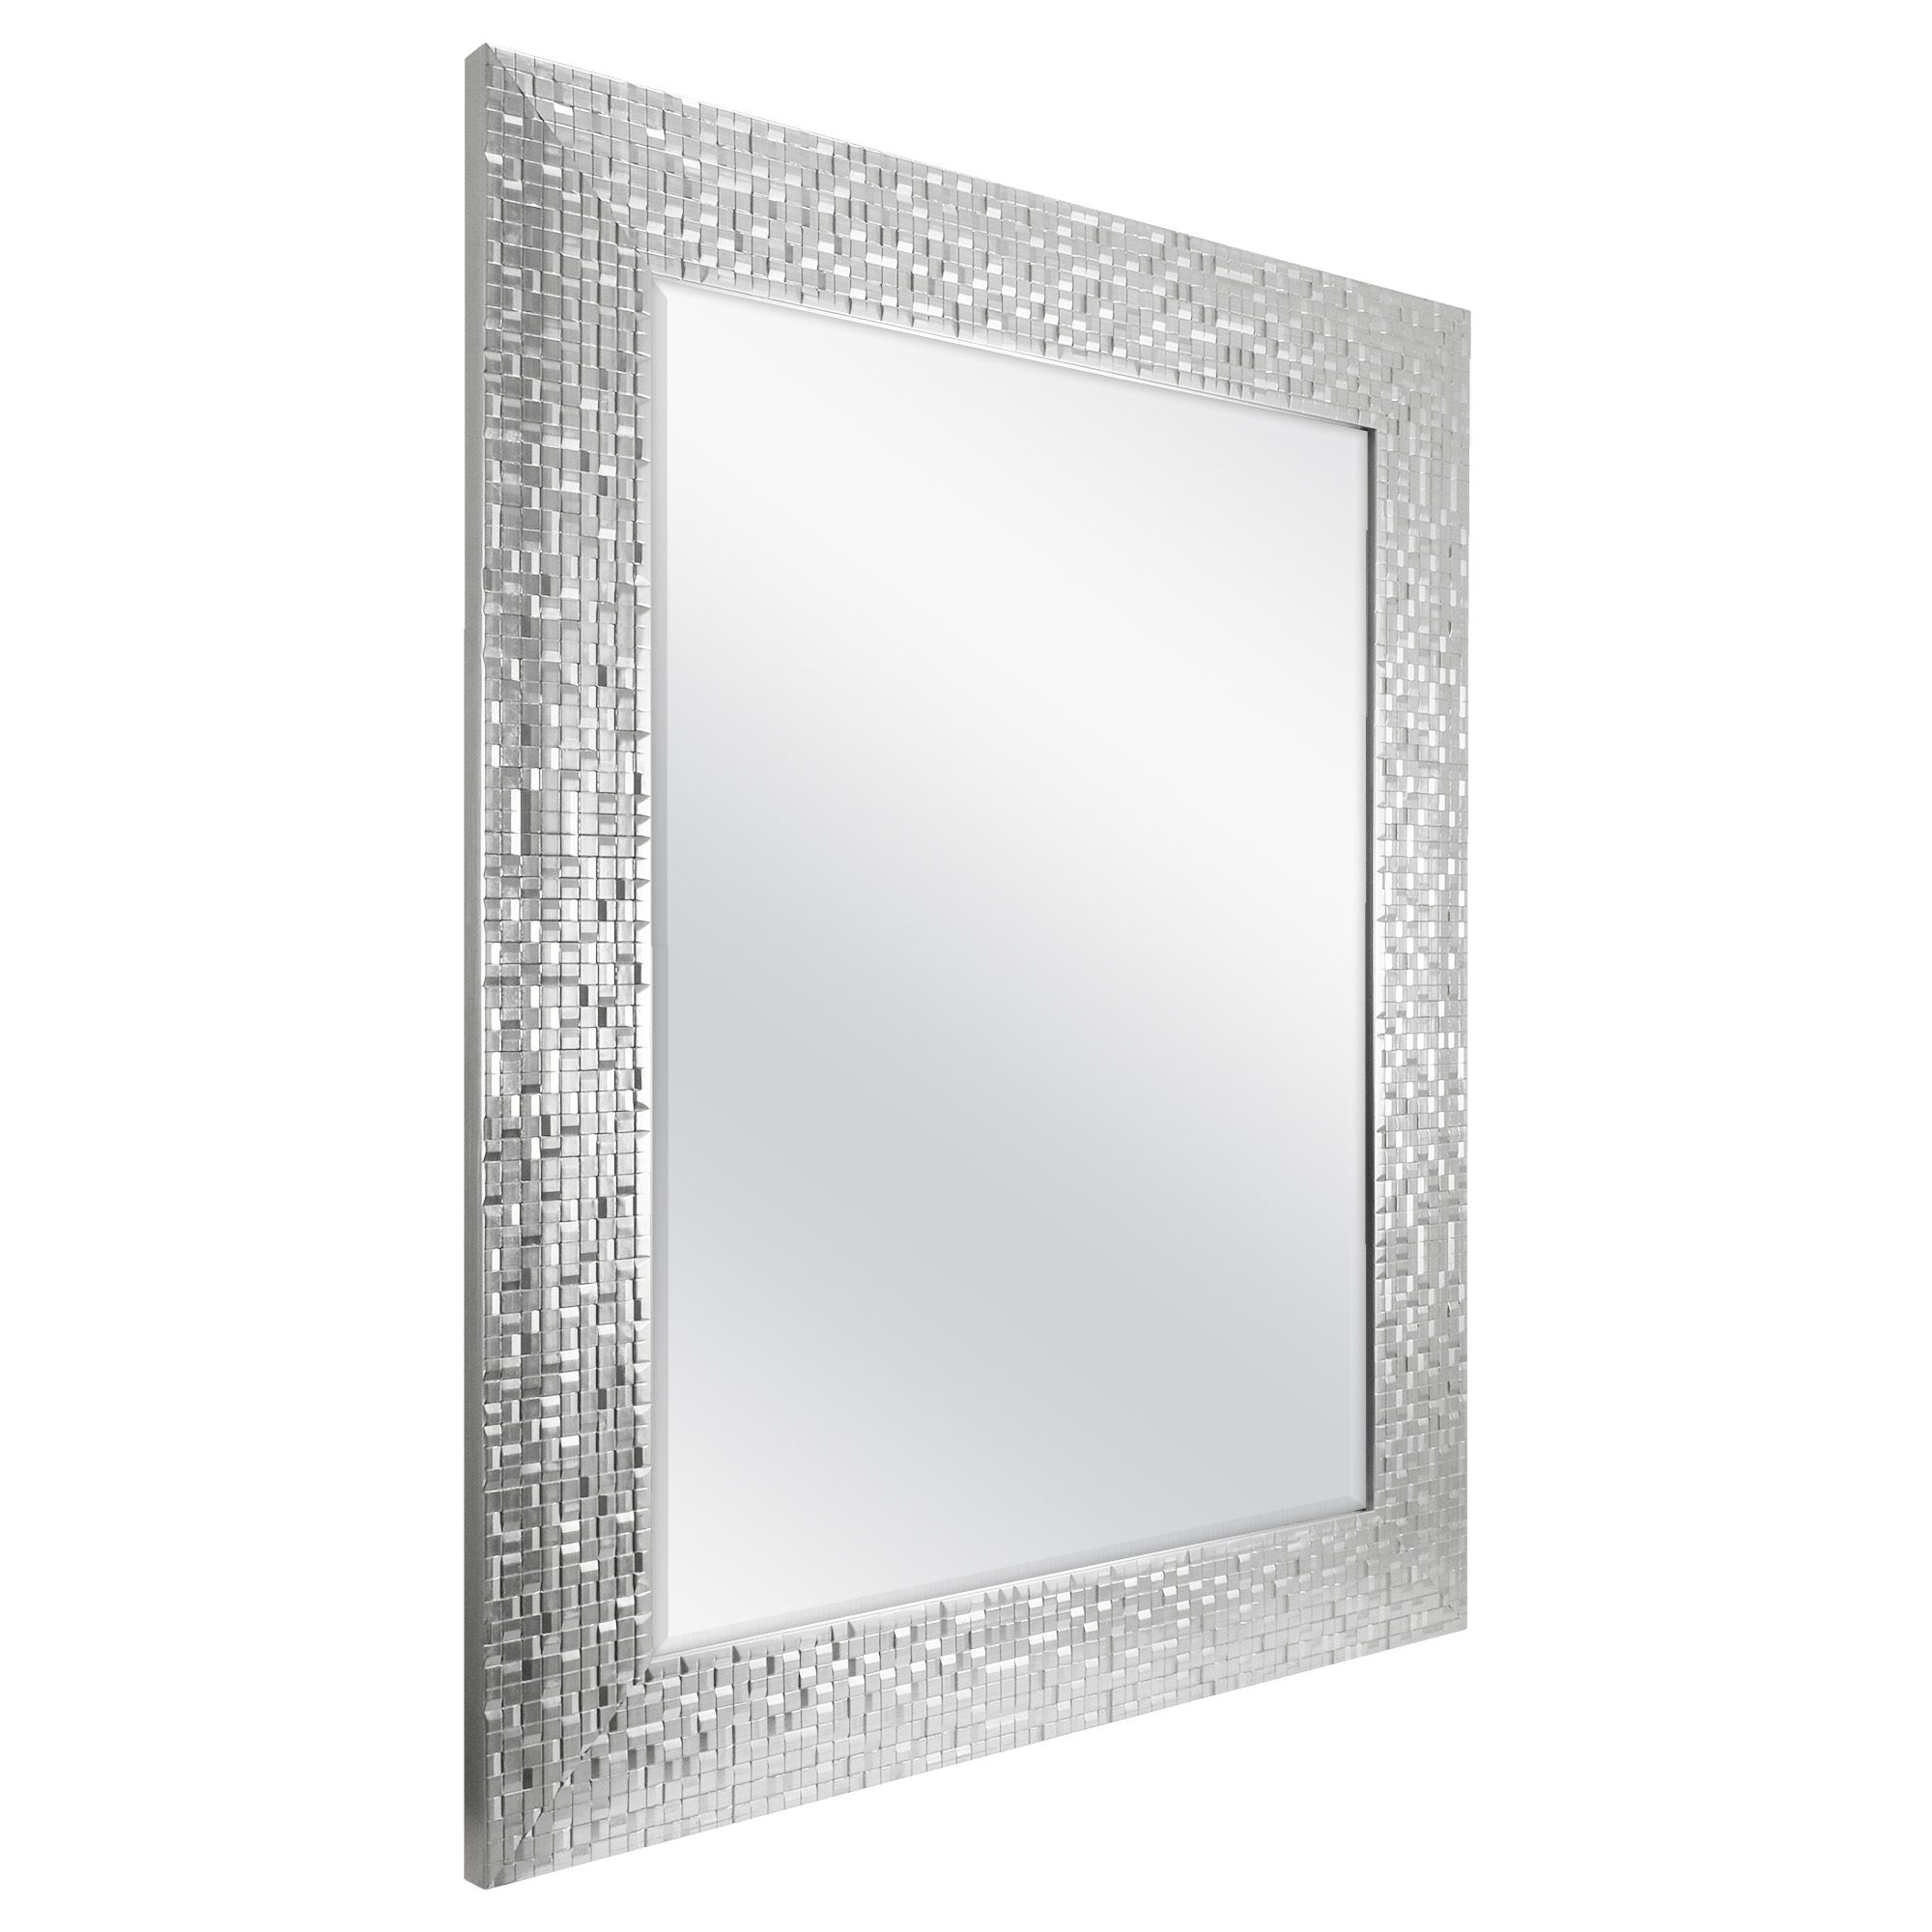 Better Homes & Gardens Silver Glam Mosaic Tile Wall Mirror, 23x28 Inch - image 2 of 7